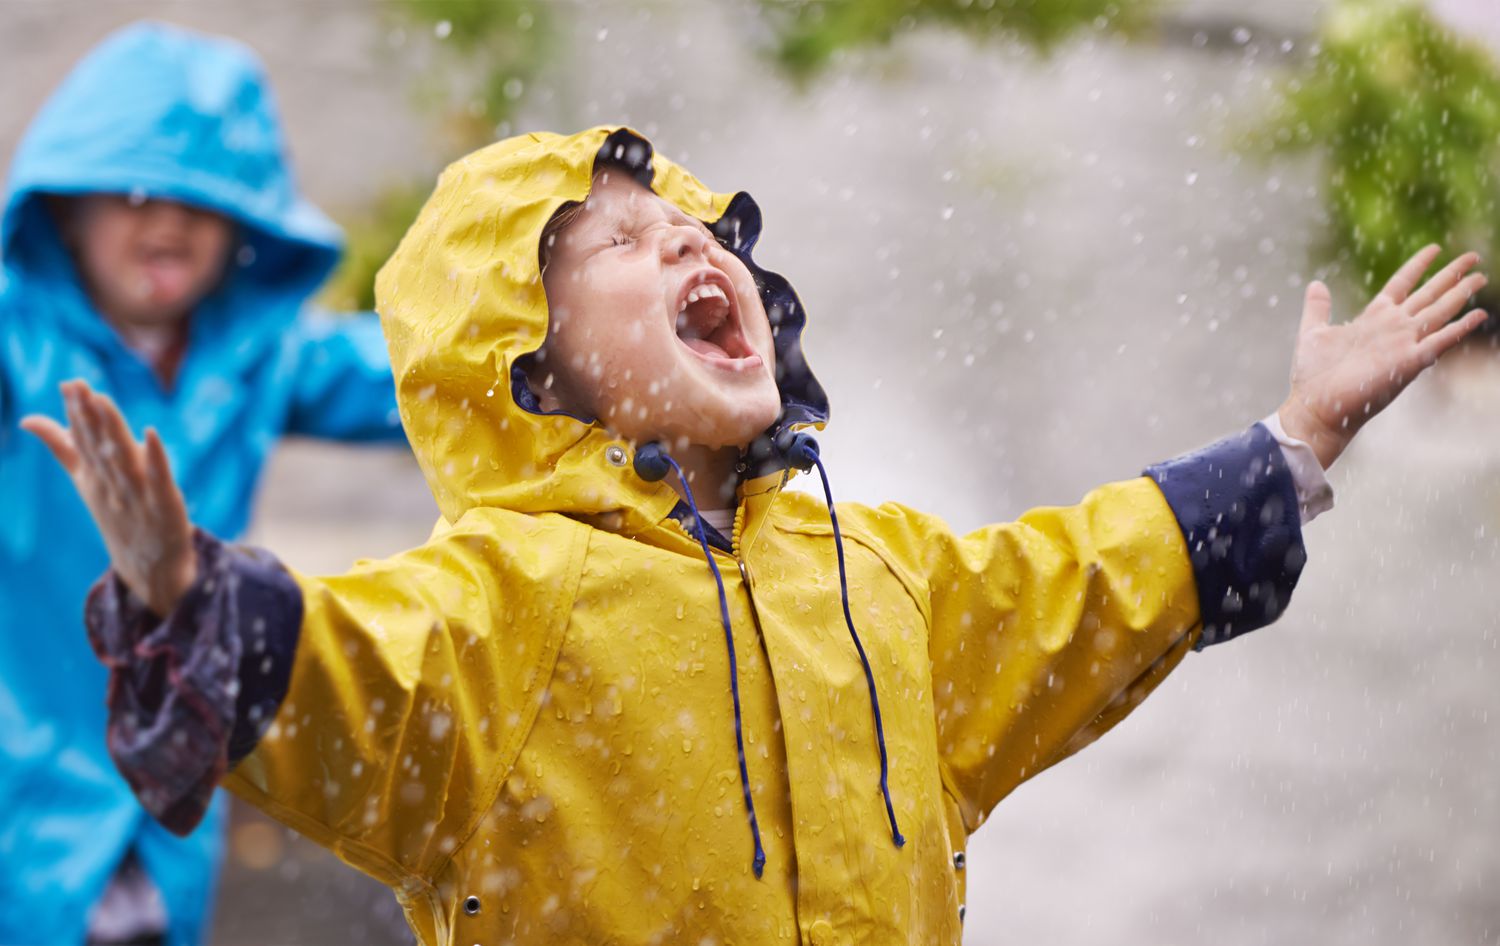 Embracing the Outdoors - Rainy day indoor activities for kids